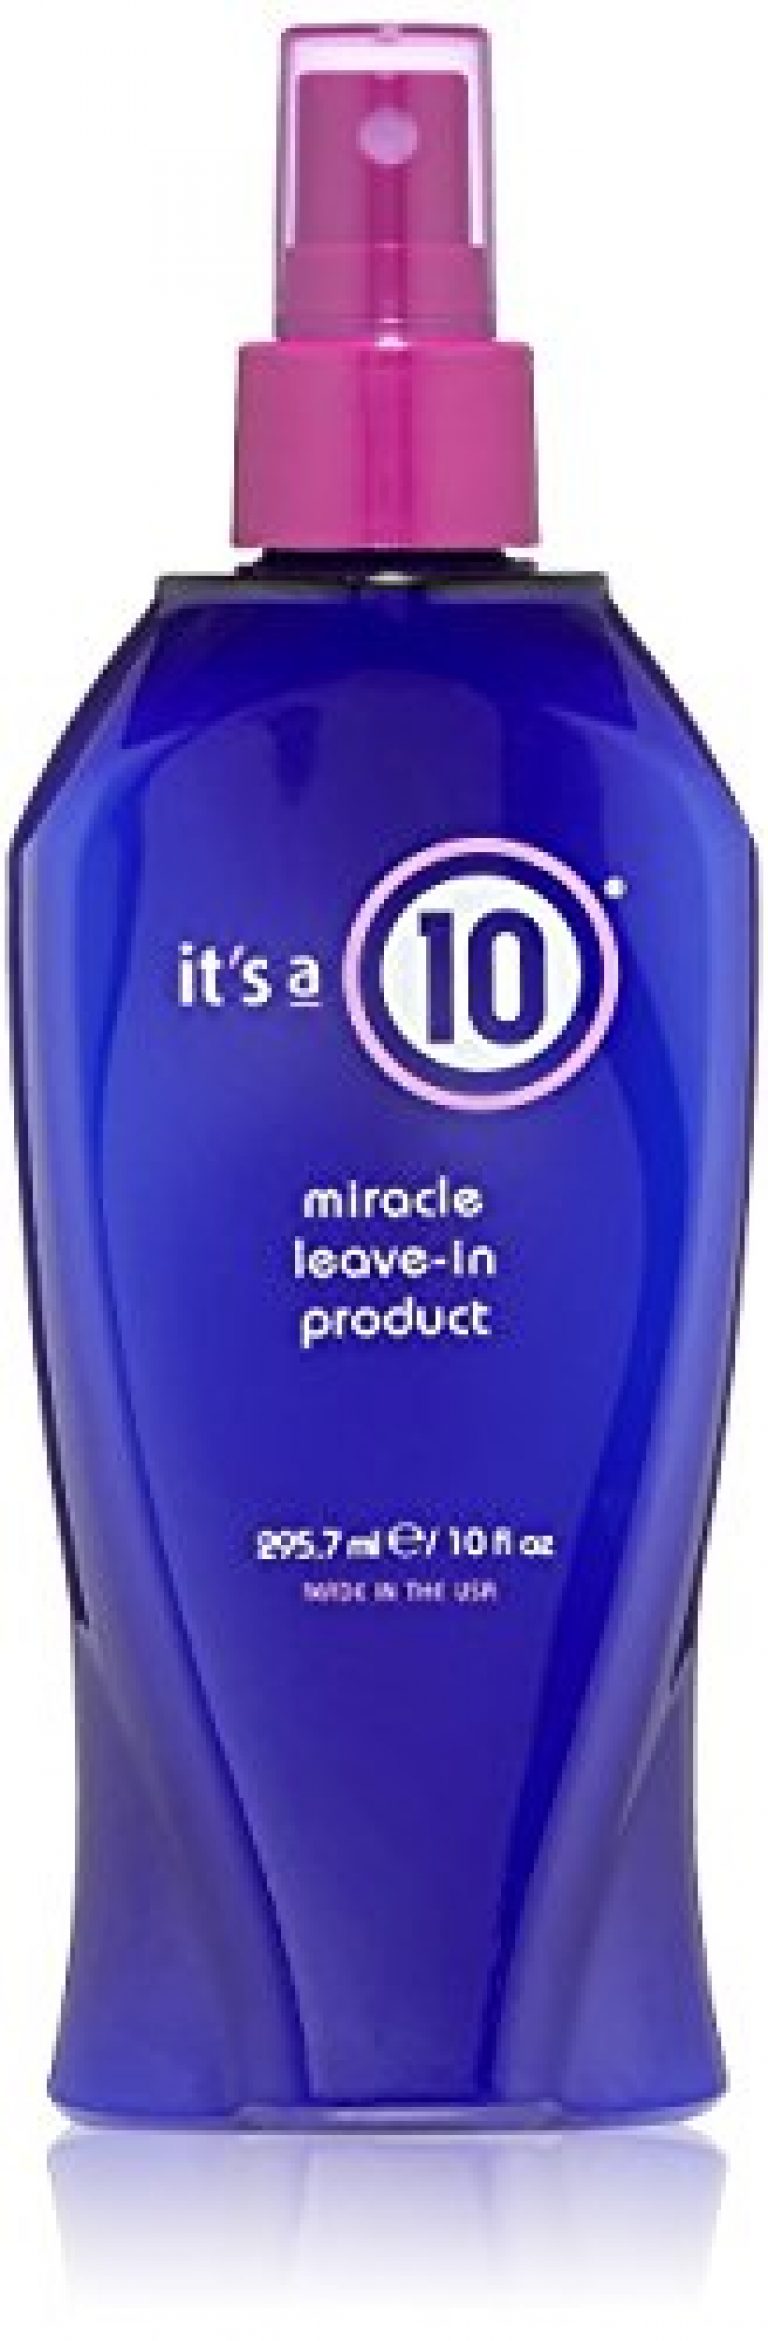 It's A 10 Haircare Miracle Leave-In Conditioner Spray - 10 oz. - 1ct 1